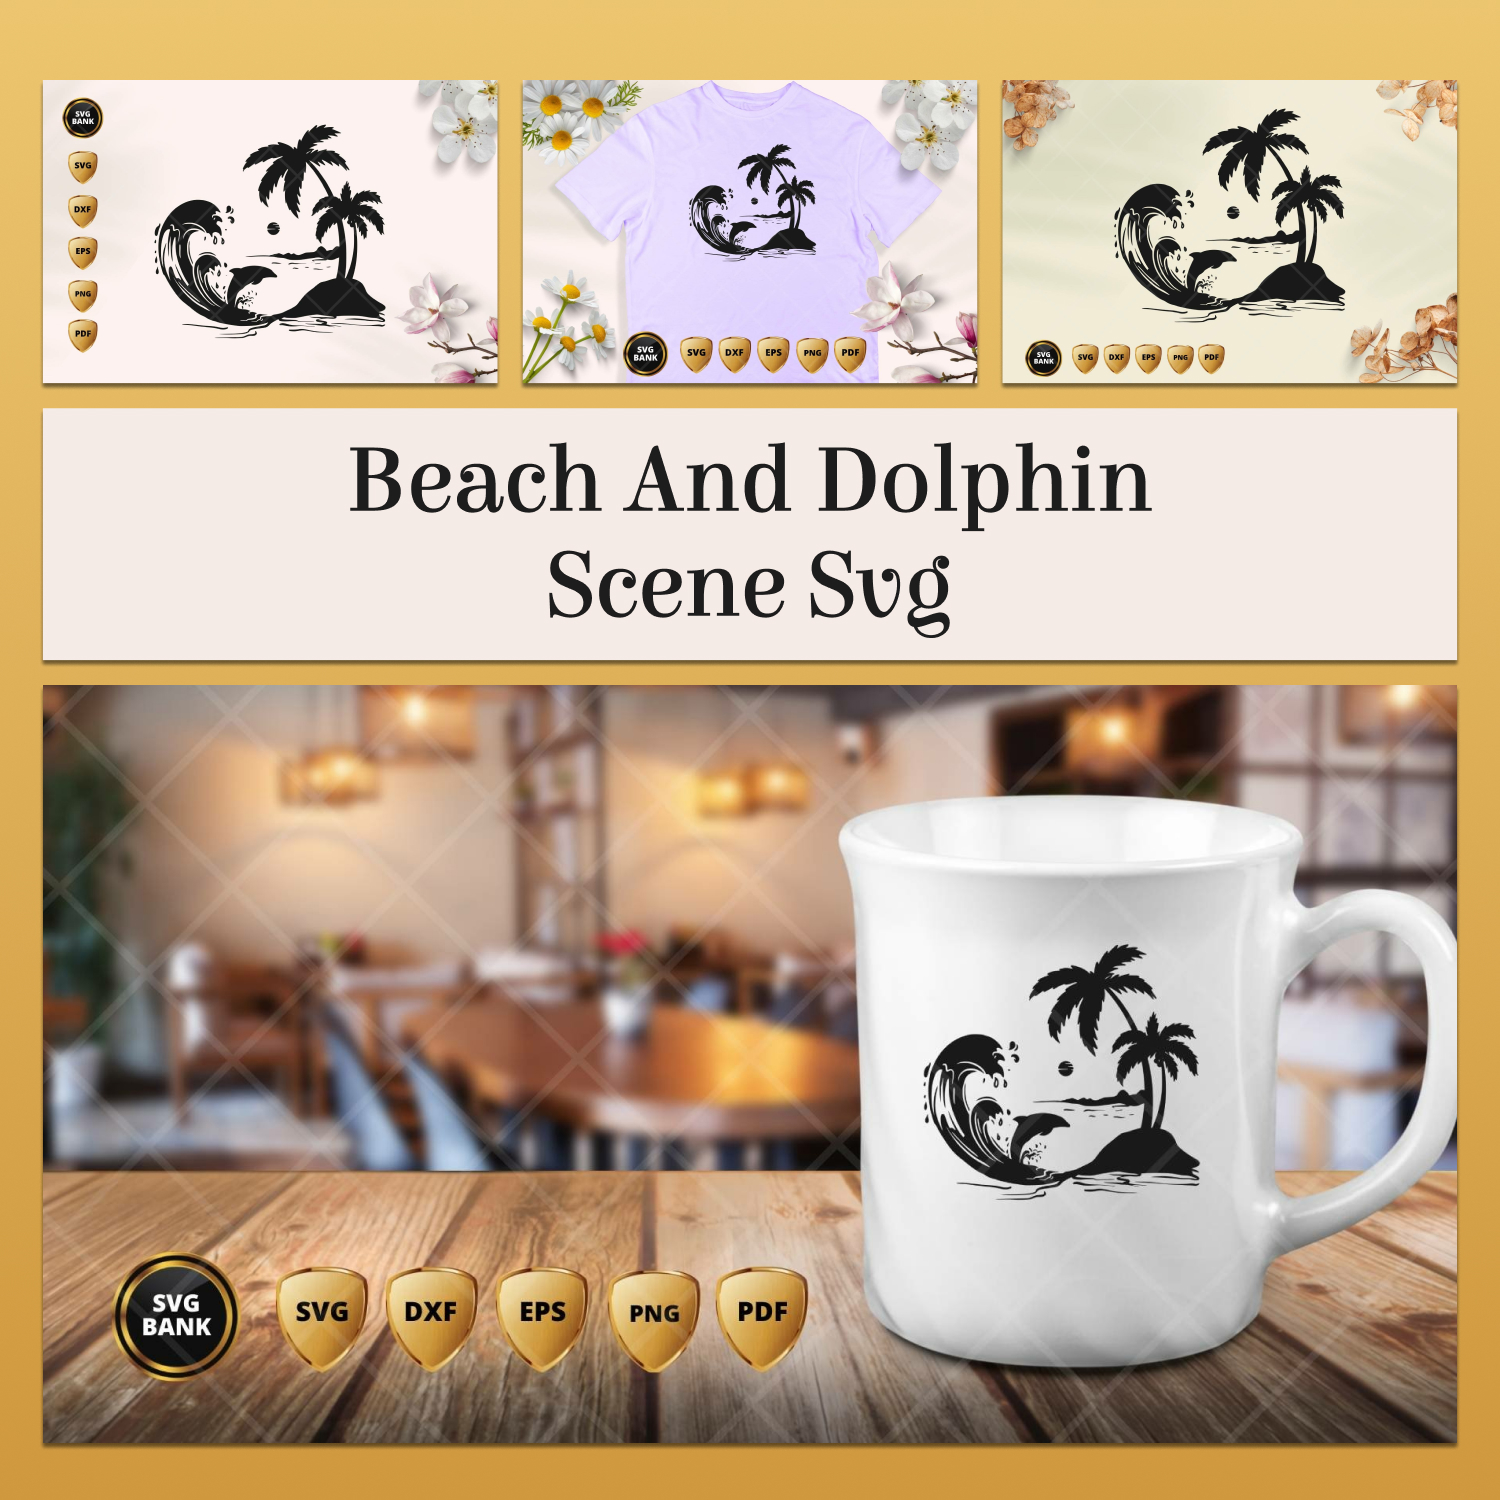 Coffee mug with a picture of a beach and dolphin on it.